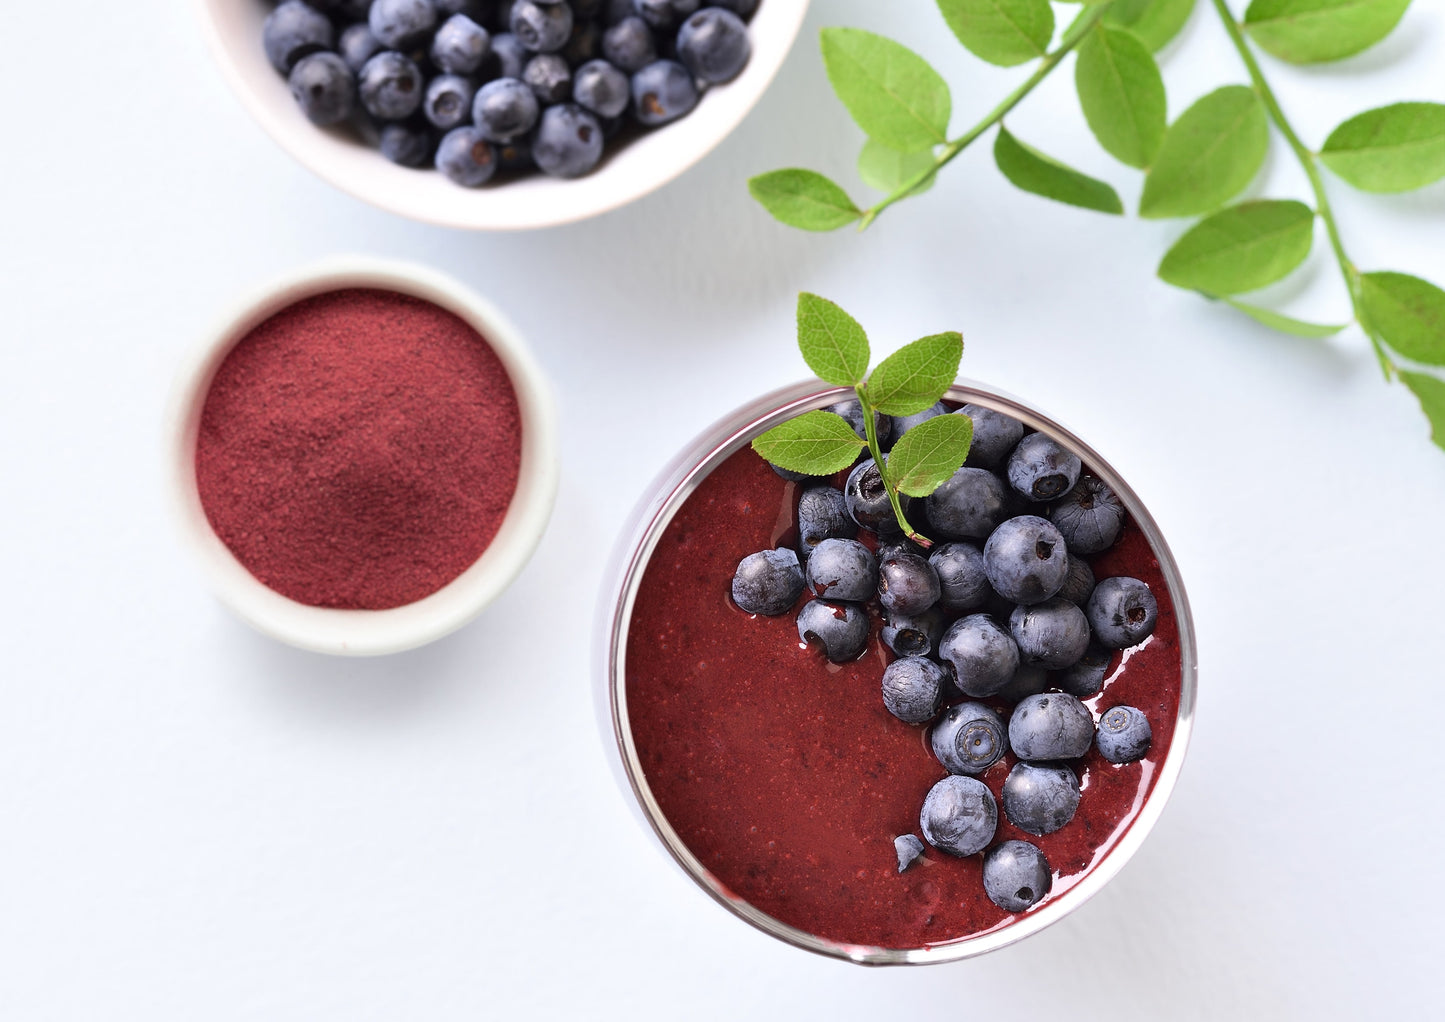 Organic Blueberry Powder - Non-GMO, Unsulfured, Raw, Vegan, Bulk, Great for Juices, Smoothies, and Instant Breakfast Drinks, Contains Maltodextrin, No Sulphites - by Food to Live